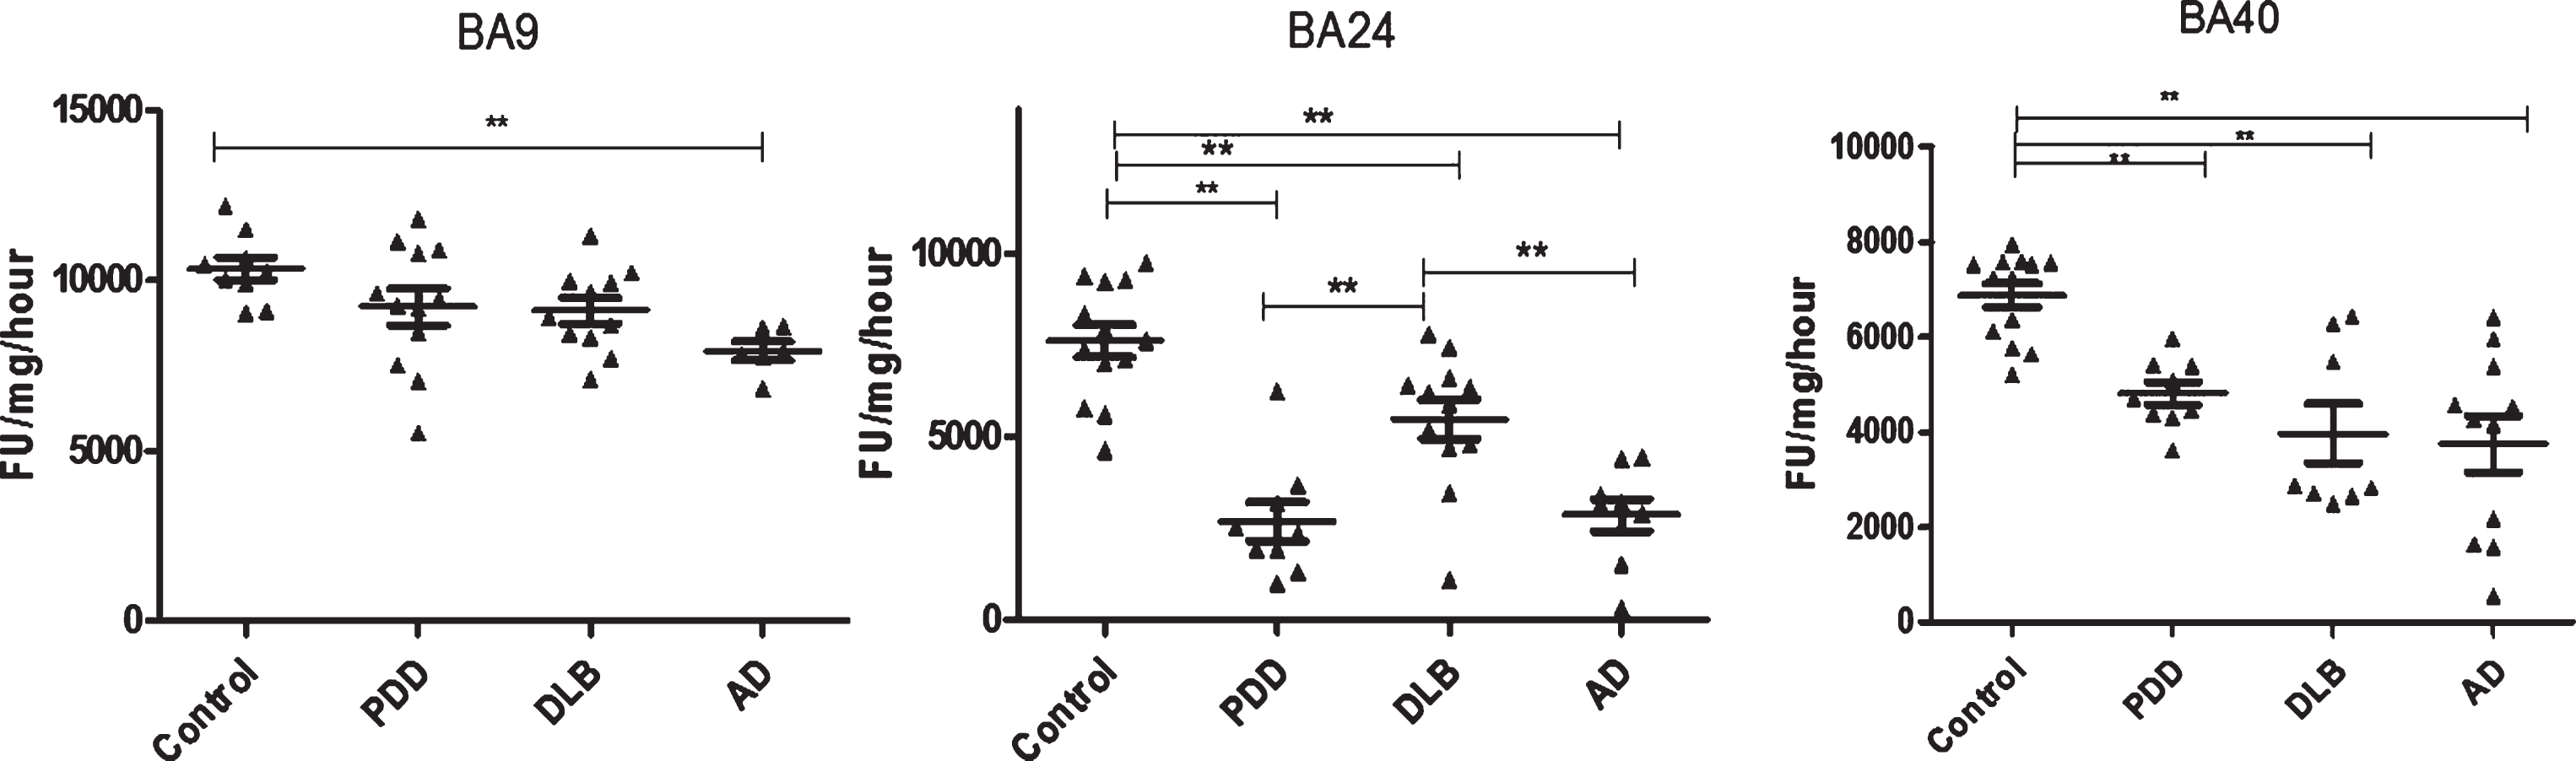 Analysis of PGPH-like activities in brain homogenates from BA9, BA40, and BA24 of DLB, PDD, AD, and controls. Scatter plots are shown of PGPH-like activity measurement in BA9, BA40, and BA24 homogenates from DLB, PDD, AD, and normal control samples using the fluorogenic substrate assay. Activities are expressed as fluorescence units (FU)/mg protein/hour. BA9: PGPH-like activity was significantly decreased only in AD patients (p = 0.012, n = 6) compared with the control (n = 9); DLB and PDD groups were lower compared with the control subjects, but there was no statistically significant difference between them. The values for the ANOVA for PGPH-like activity measurement in BA9 were: F = 7.897, d.f. = 3, 34, p = 0.001). BA40; the differences between the patients’ groups (PDD, DLB, and AD) and the control were statistically different (one-way ANOVA, F = 10.263, d.f. = 3 and 42, p = 0.001;). The reduction in PGPH-like activity was higher in the AD group with a mean±SEM value of 3741.8±587.5, n = 11, compared with 1.28±0.028, n = 24 for the controls. The reduction in both DLB and PDD were also significant with a mean±SEM value of 4133.7±640, n = 10 and 4809±240, n = 9 compared with control (Bonferroni post hoc test). In BA24, there was a significant difference between DLB (p = 0.013, n = 12), PDD (P = 0.001, n = 9) and AD (P = 0.001, n = 9) compared with the control (n = 13) (one-way ANOVA, F = 23.087, d.f. = 3 and 39, p = 0.001; Bonferroni post hoc test). PGPH-like activity measurements were significant lower in both AD (p = 0.004, n = 9) and PDD (p = 0.002, n = 9) compared with DLB subjects. The horizontal bars within the data points in the graphs represent the mean values. (**p < 0.01).